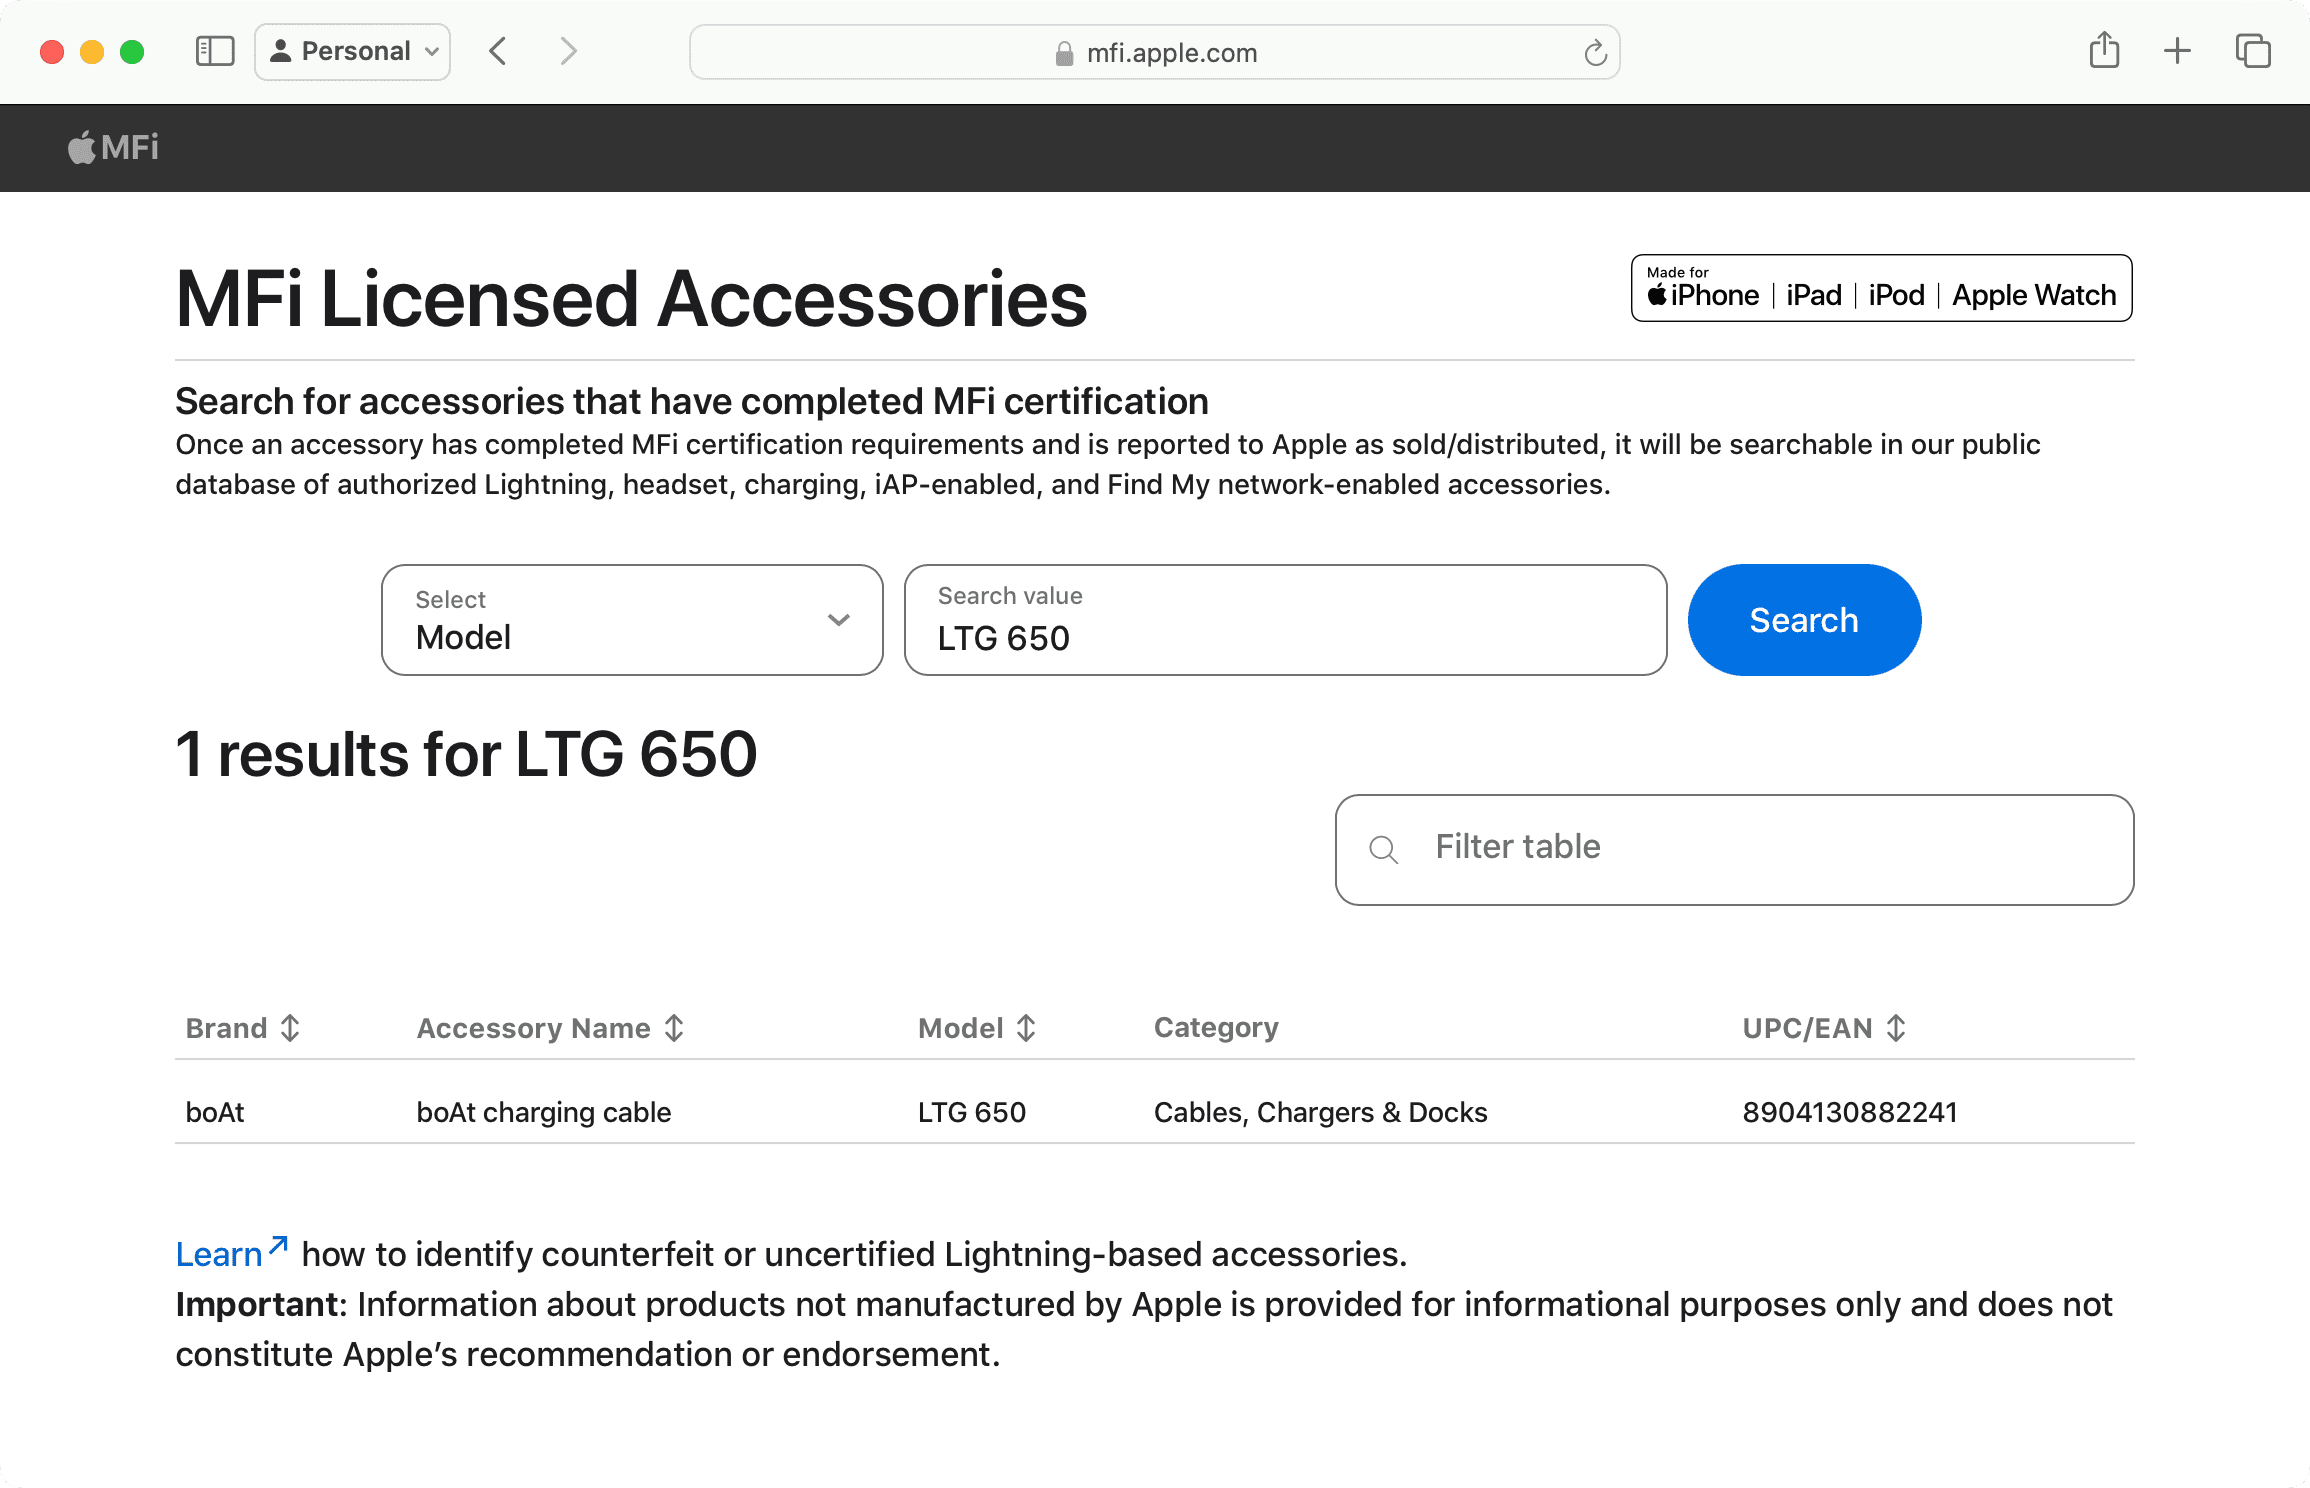 Check for MFi Licensed Accessories on Apple's official website